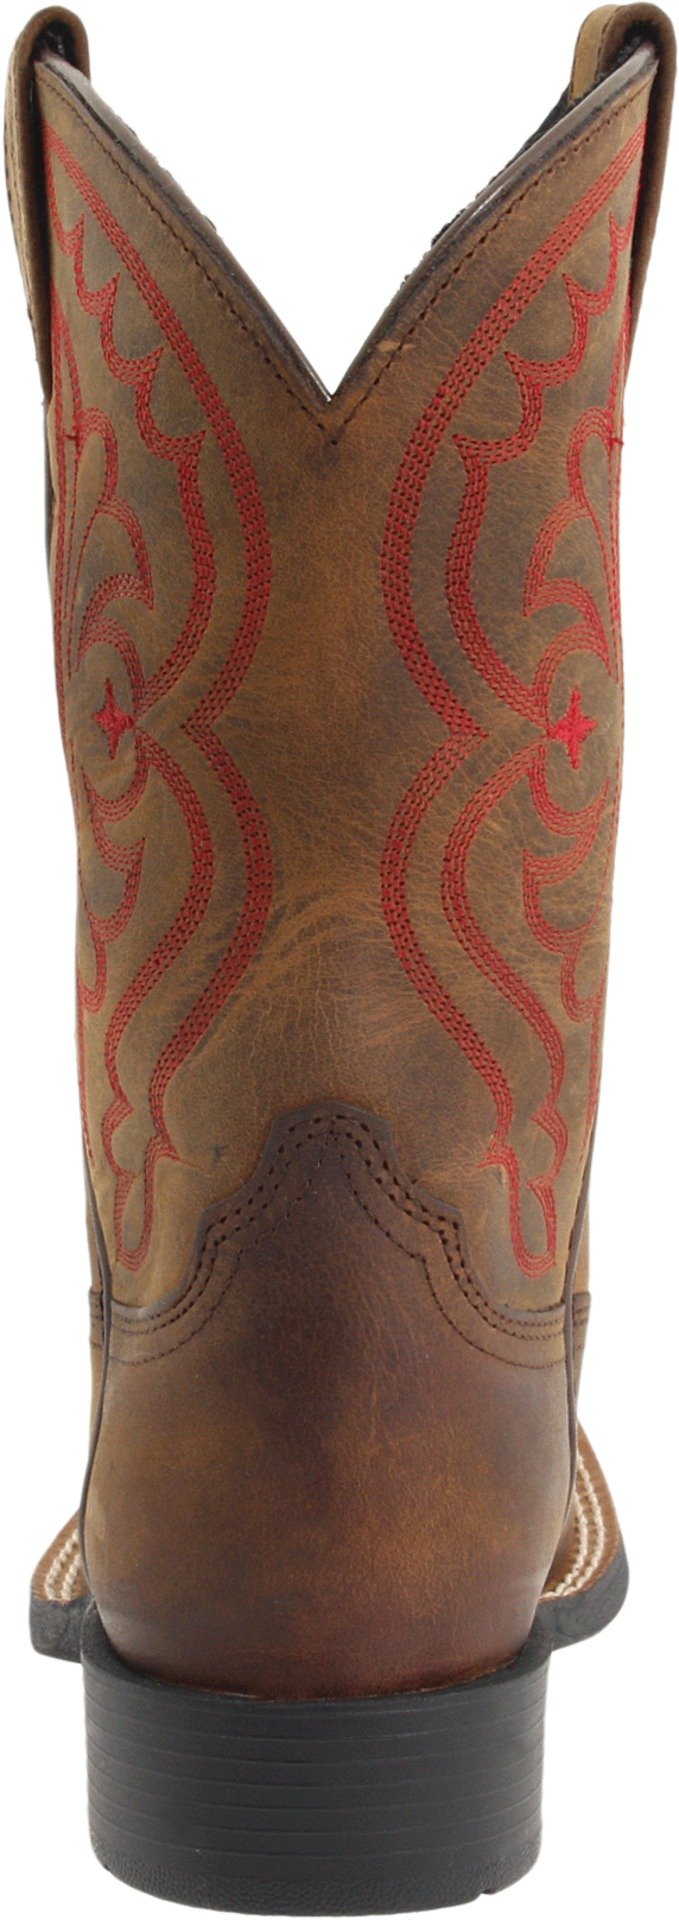 Kids' Quickdraw Western Cowboy Boot